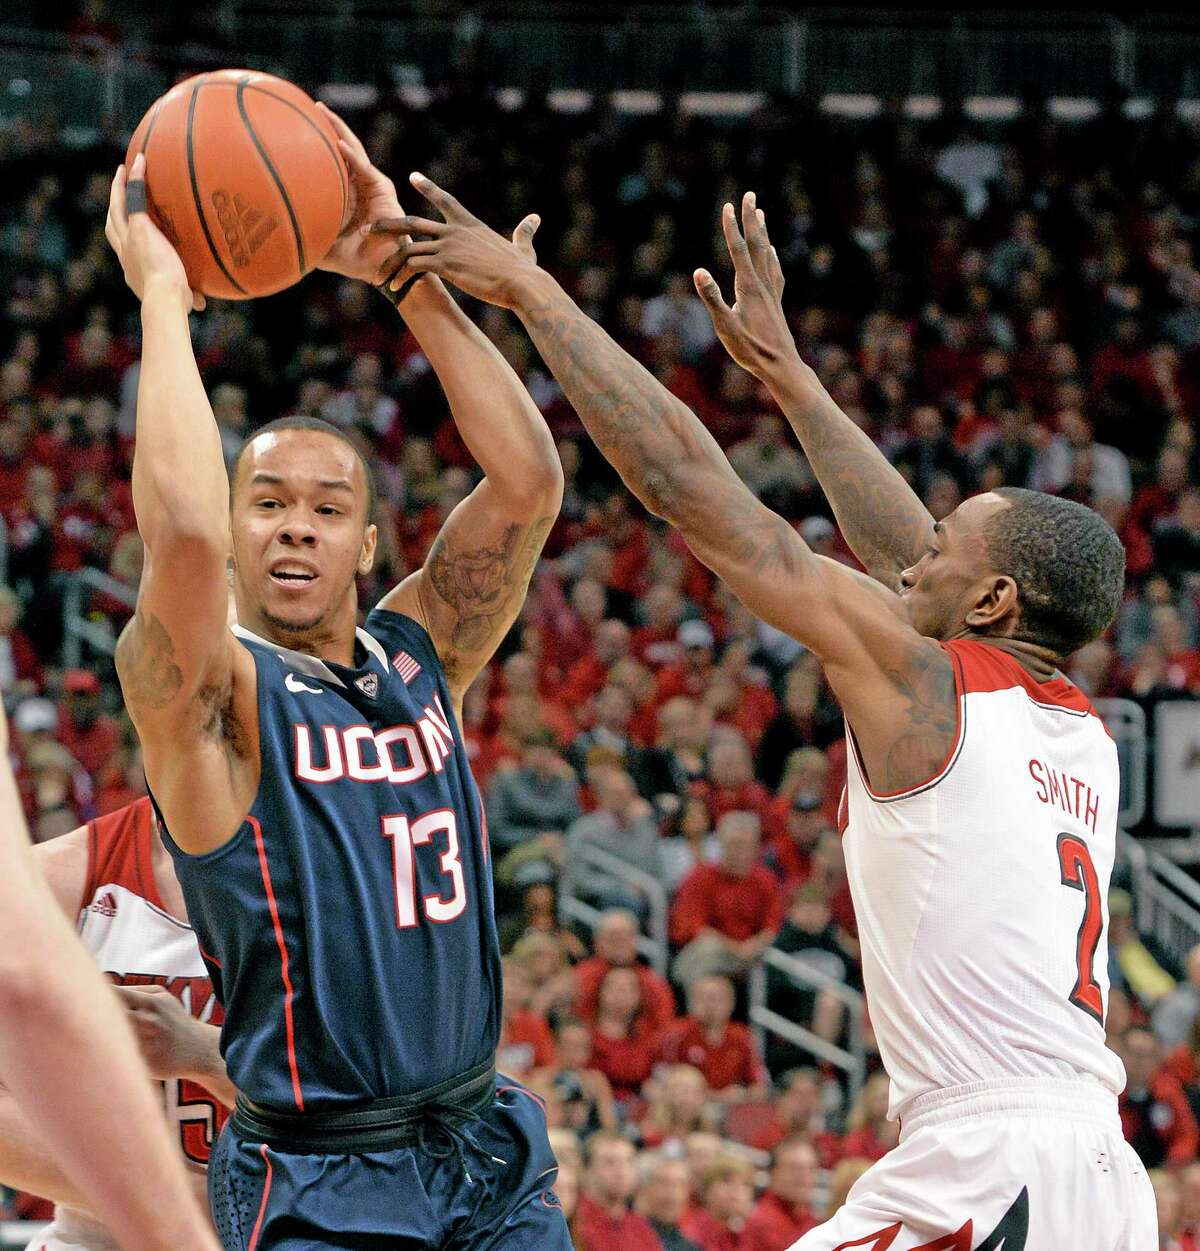 Shabazz Napier, left, edged Louisville’s Russ Smith, right, and Cincinnati’s Sean Kilpatrick for the inaugural American Athletic Conference Player of the Year award.